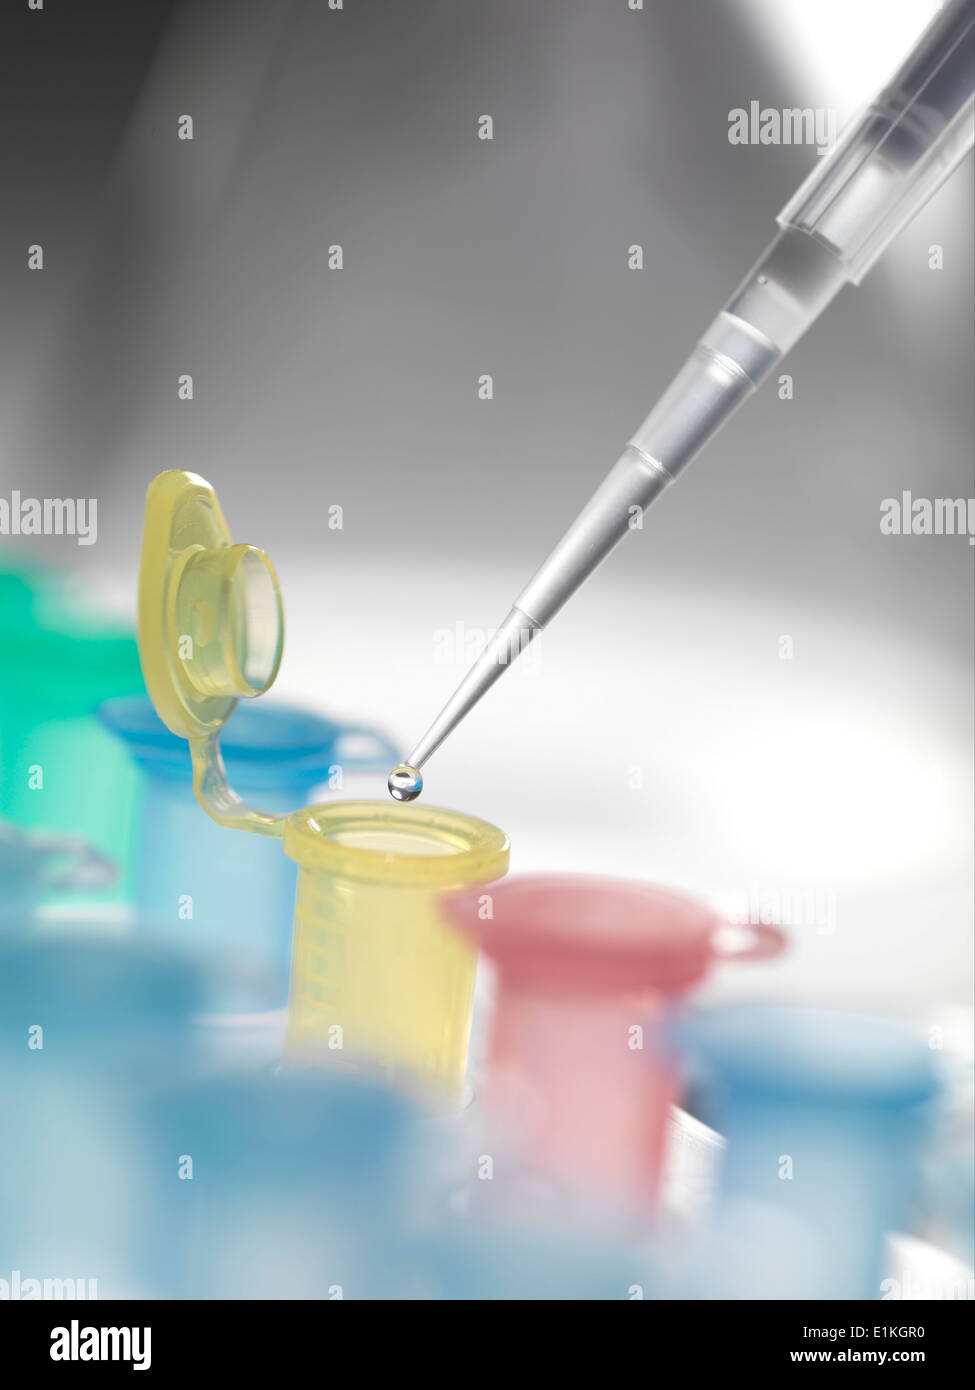 Pipette dropping a solution into a vial used for storing liquid during chemical or biological research. Stock Photo